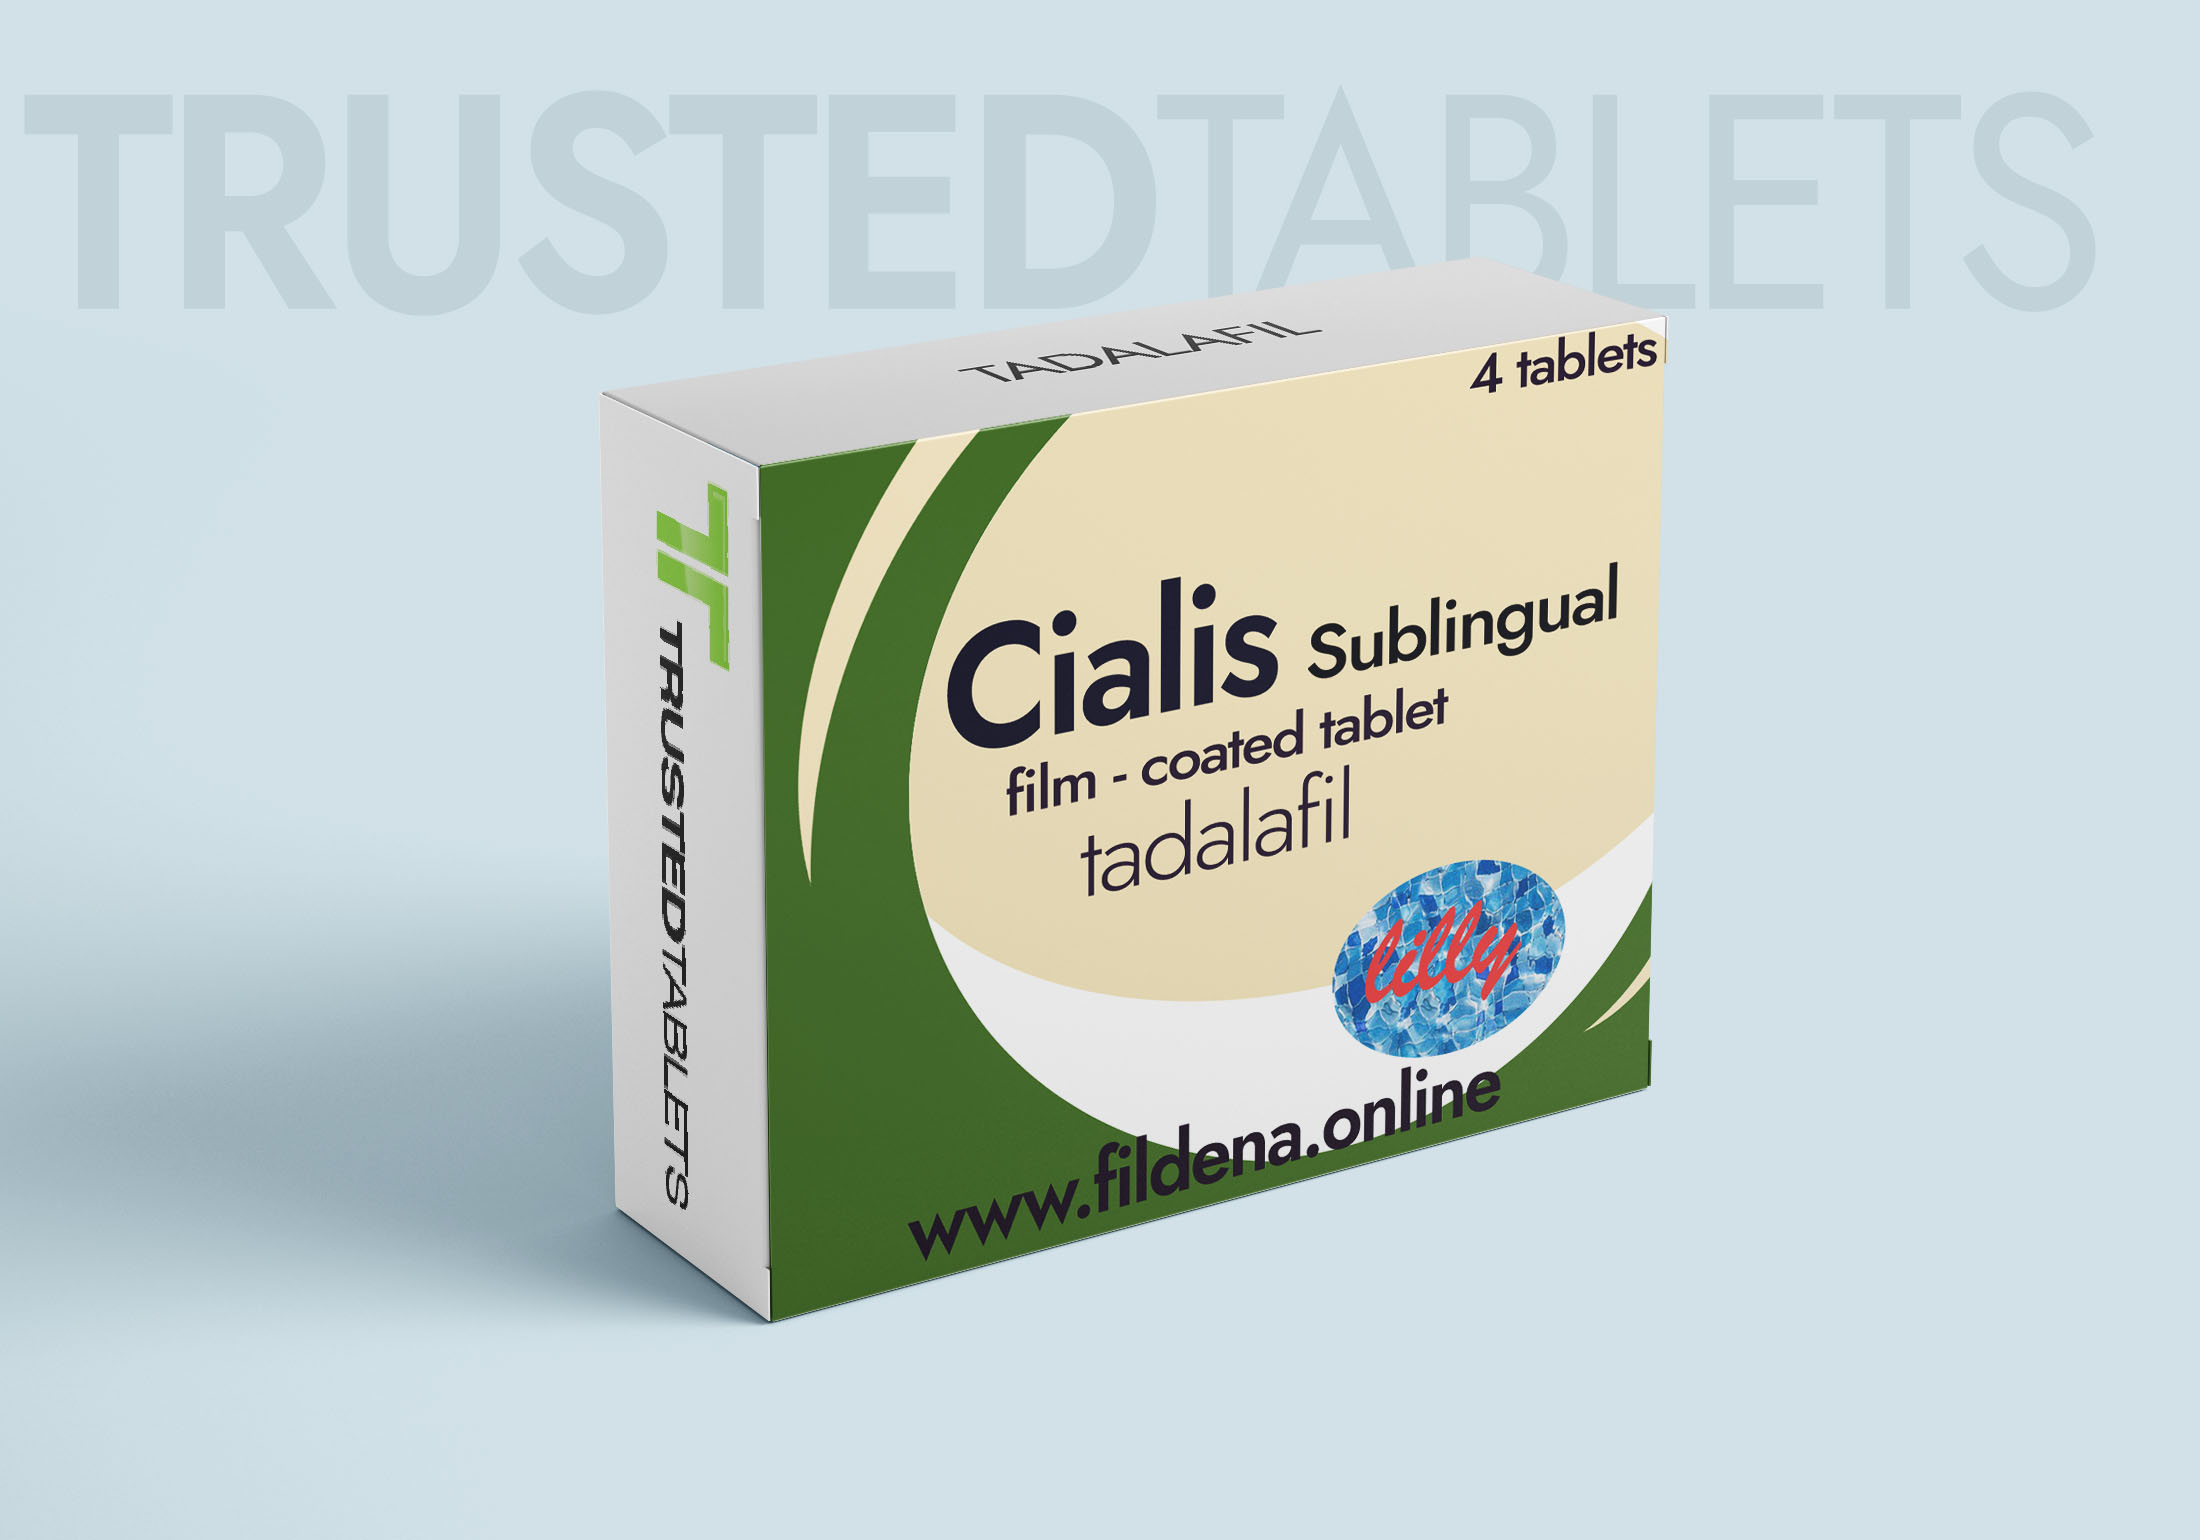 Cialis Sublingual TrustedTablets